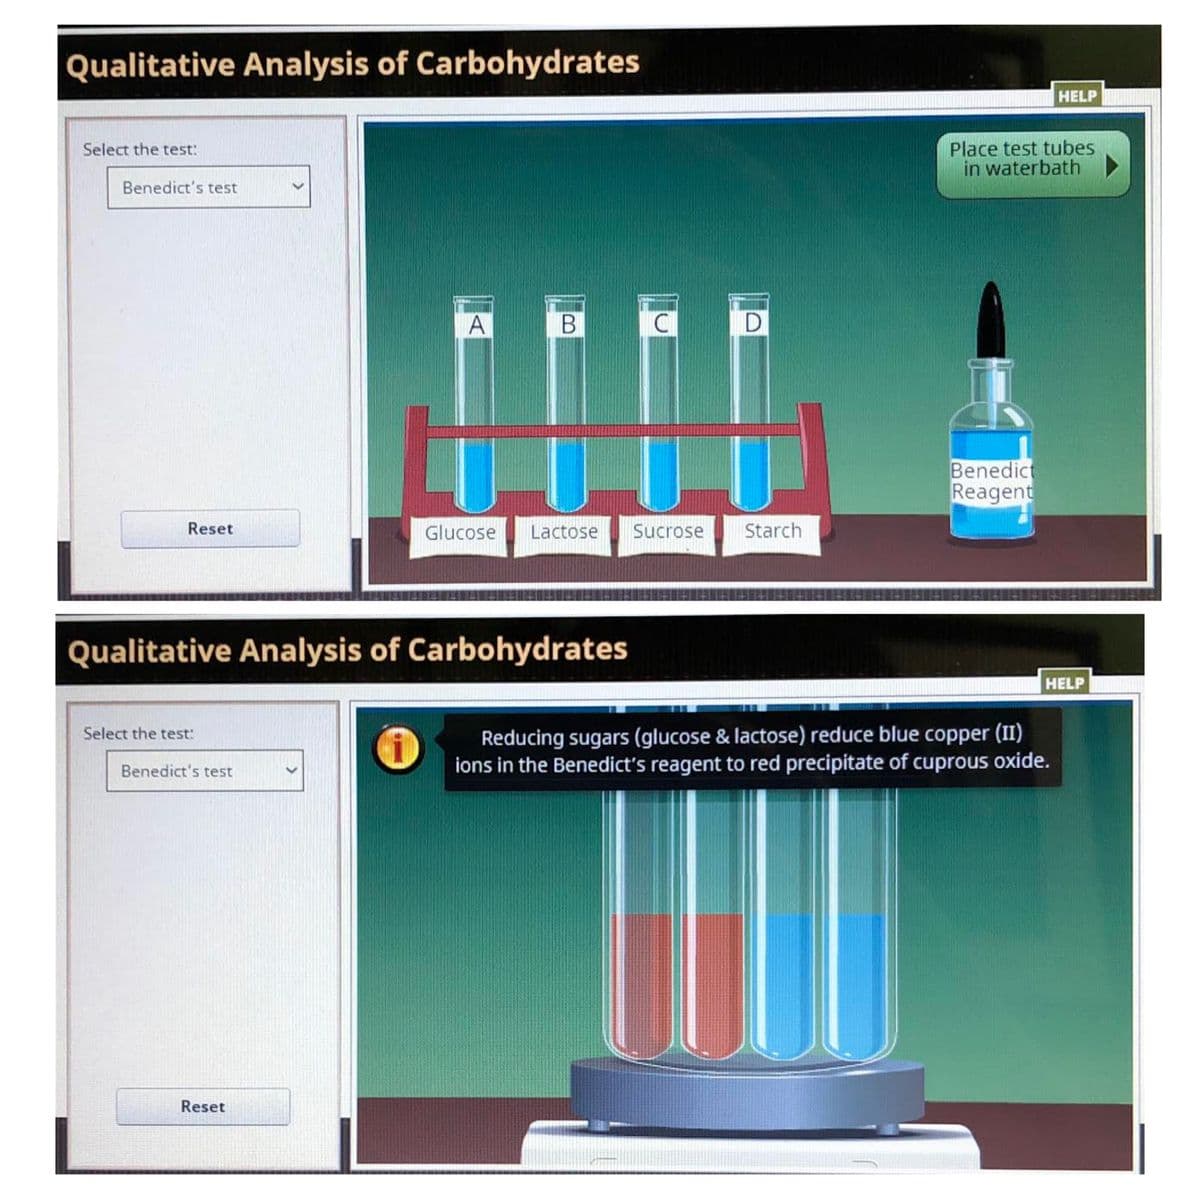 Qualitative Analysis of Carbohydrates
HELP
Place test tubes
in waterbath
Select the test:
Benedict's test
Benedict
Reagent
Reset
Glucose
Lactose
Sucrose
Starch
Qualitative Analysis of Carbohydrates
HELP
Reducing sugars (glucose & lactose) reduce blue copper (II)
ions in the Benedict's reagent to red precipitate of cuprous oxide.
Select the test:
Benedict's test
Reset
